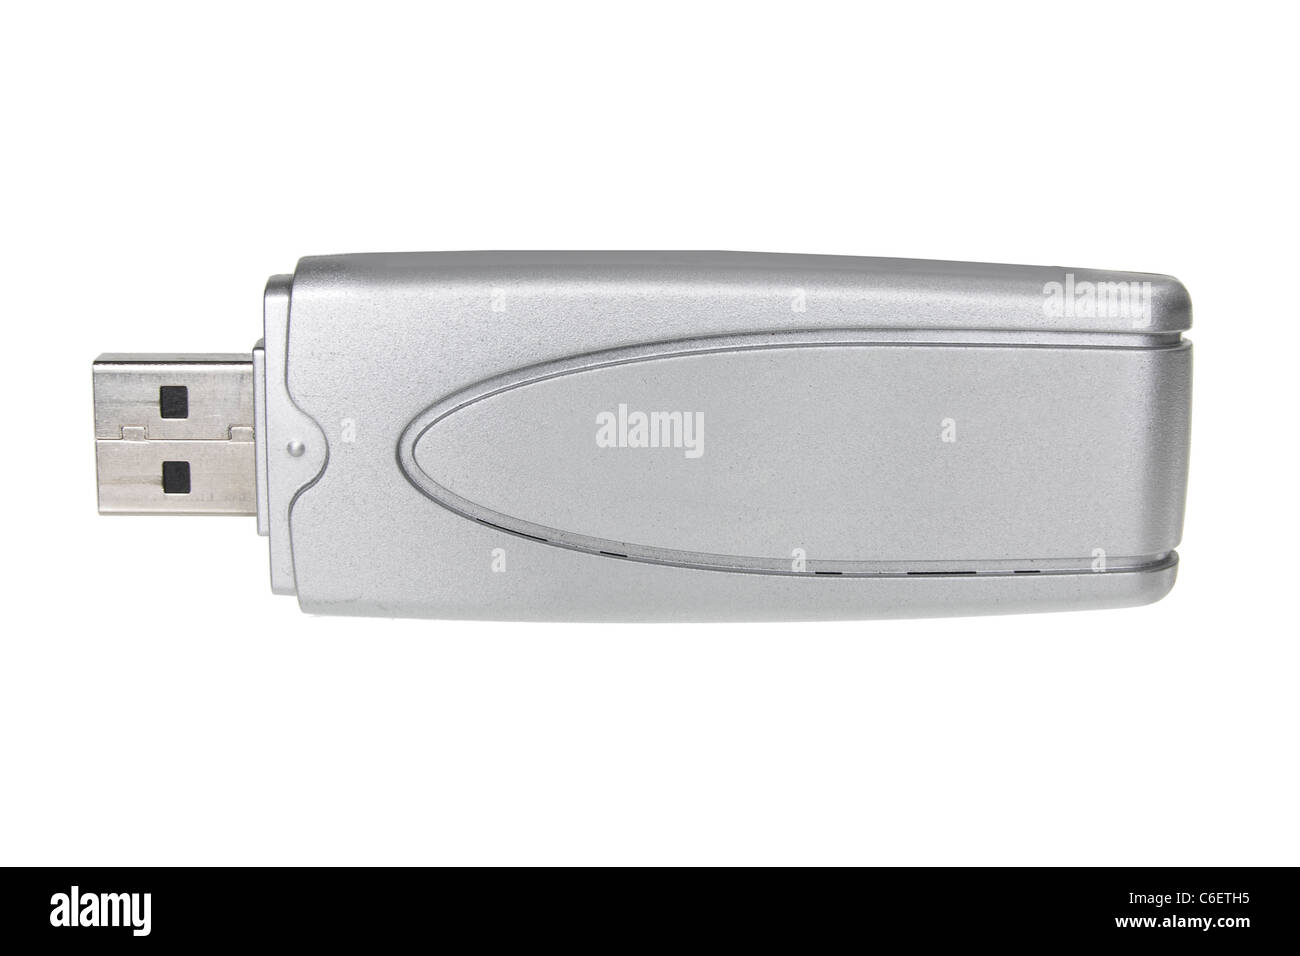 Usb Adaptor High Resolution Stock Photography and Images - Alamy